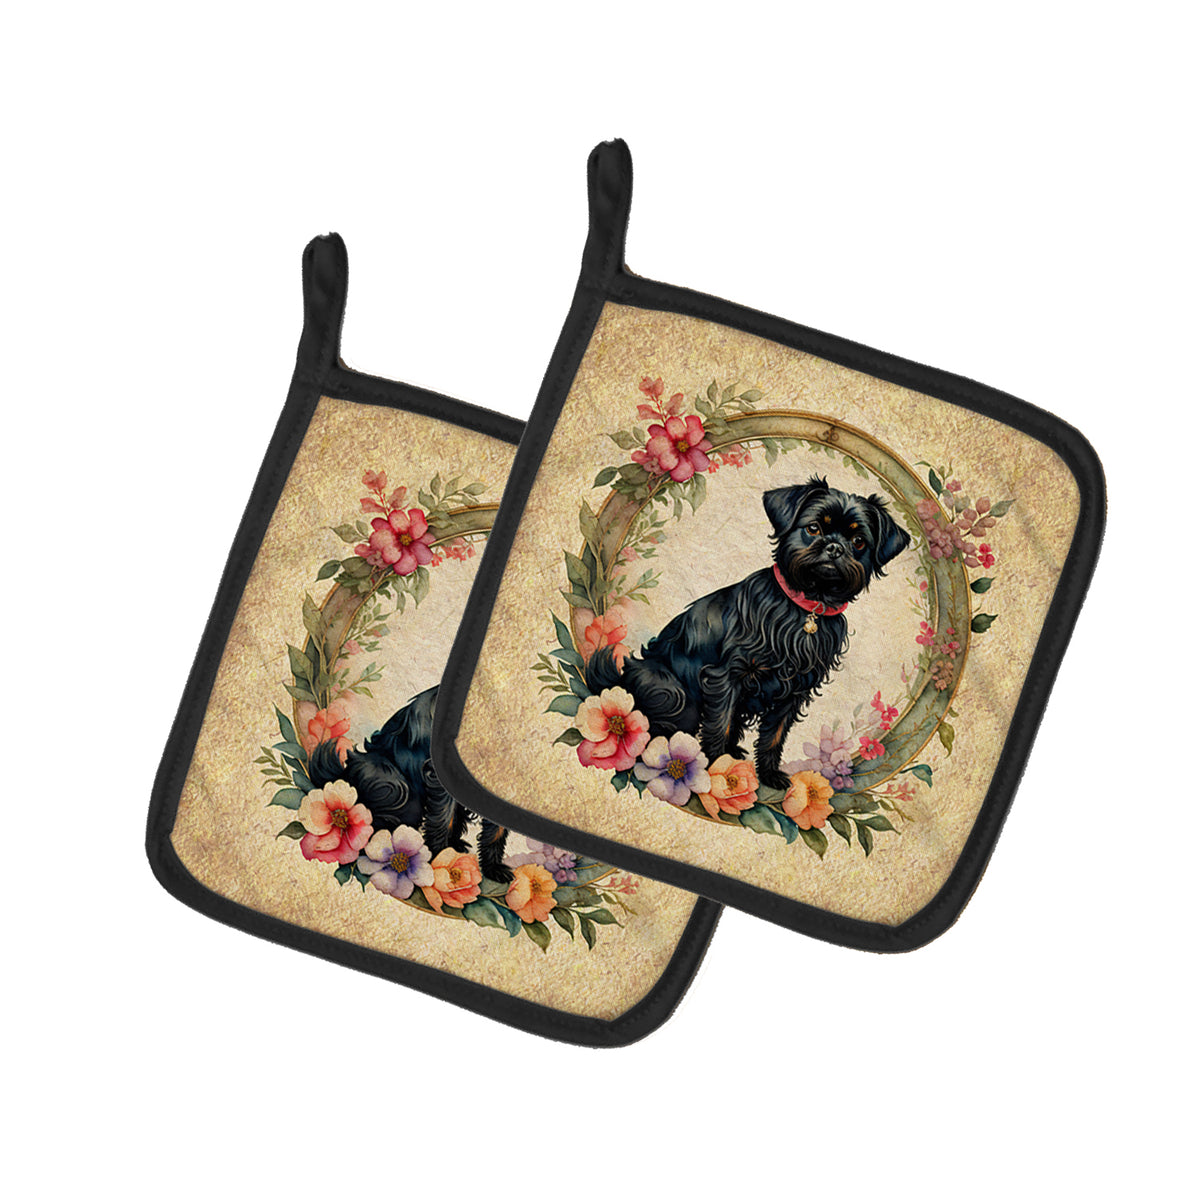 Buy this Affenpinscher and Flowers Pair of Pot Holders